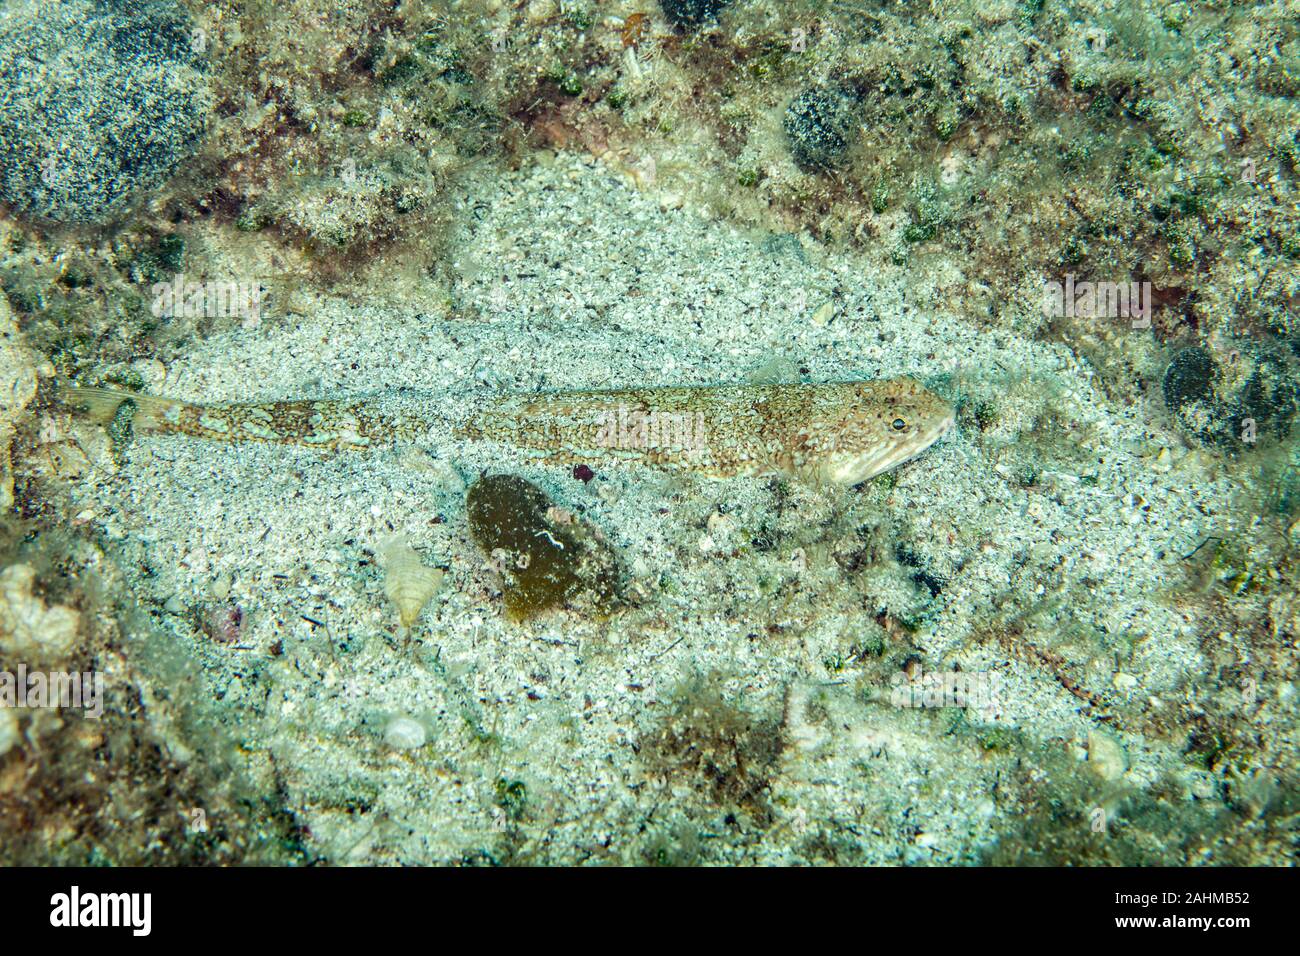 The Atlantic lizardfish, Synodus saurus, is a species of lizardfish that primarily lives in the Eastern Atlantic Stock Photo